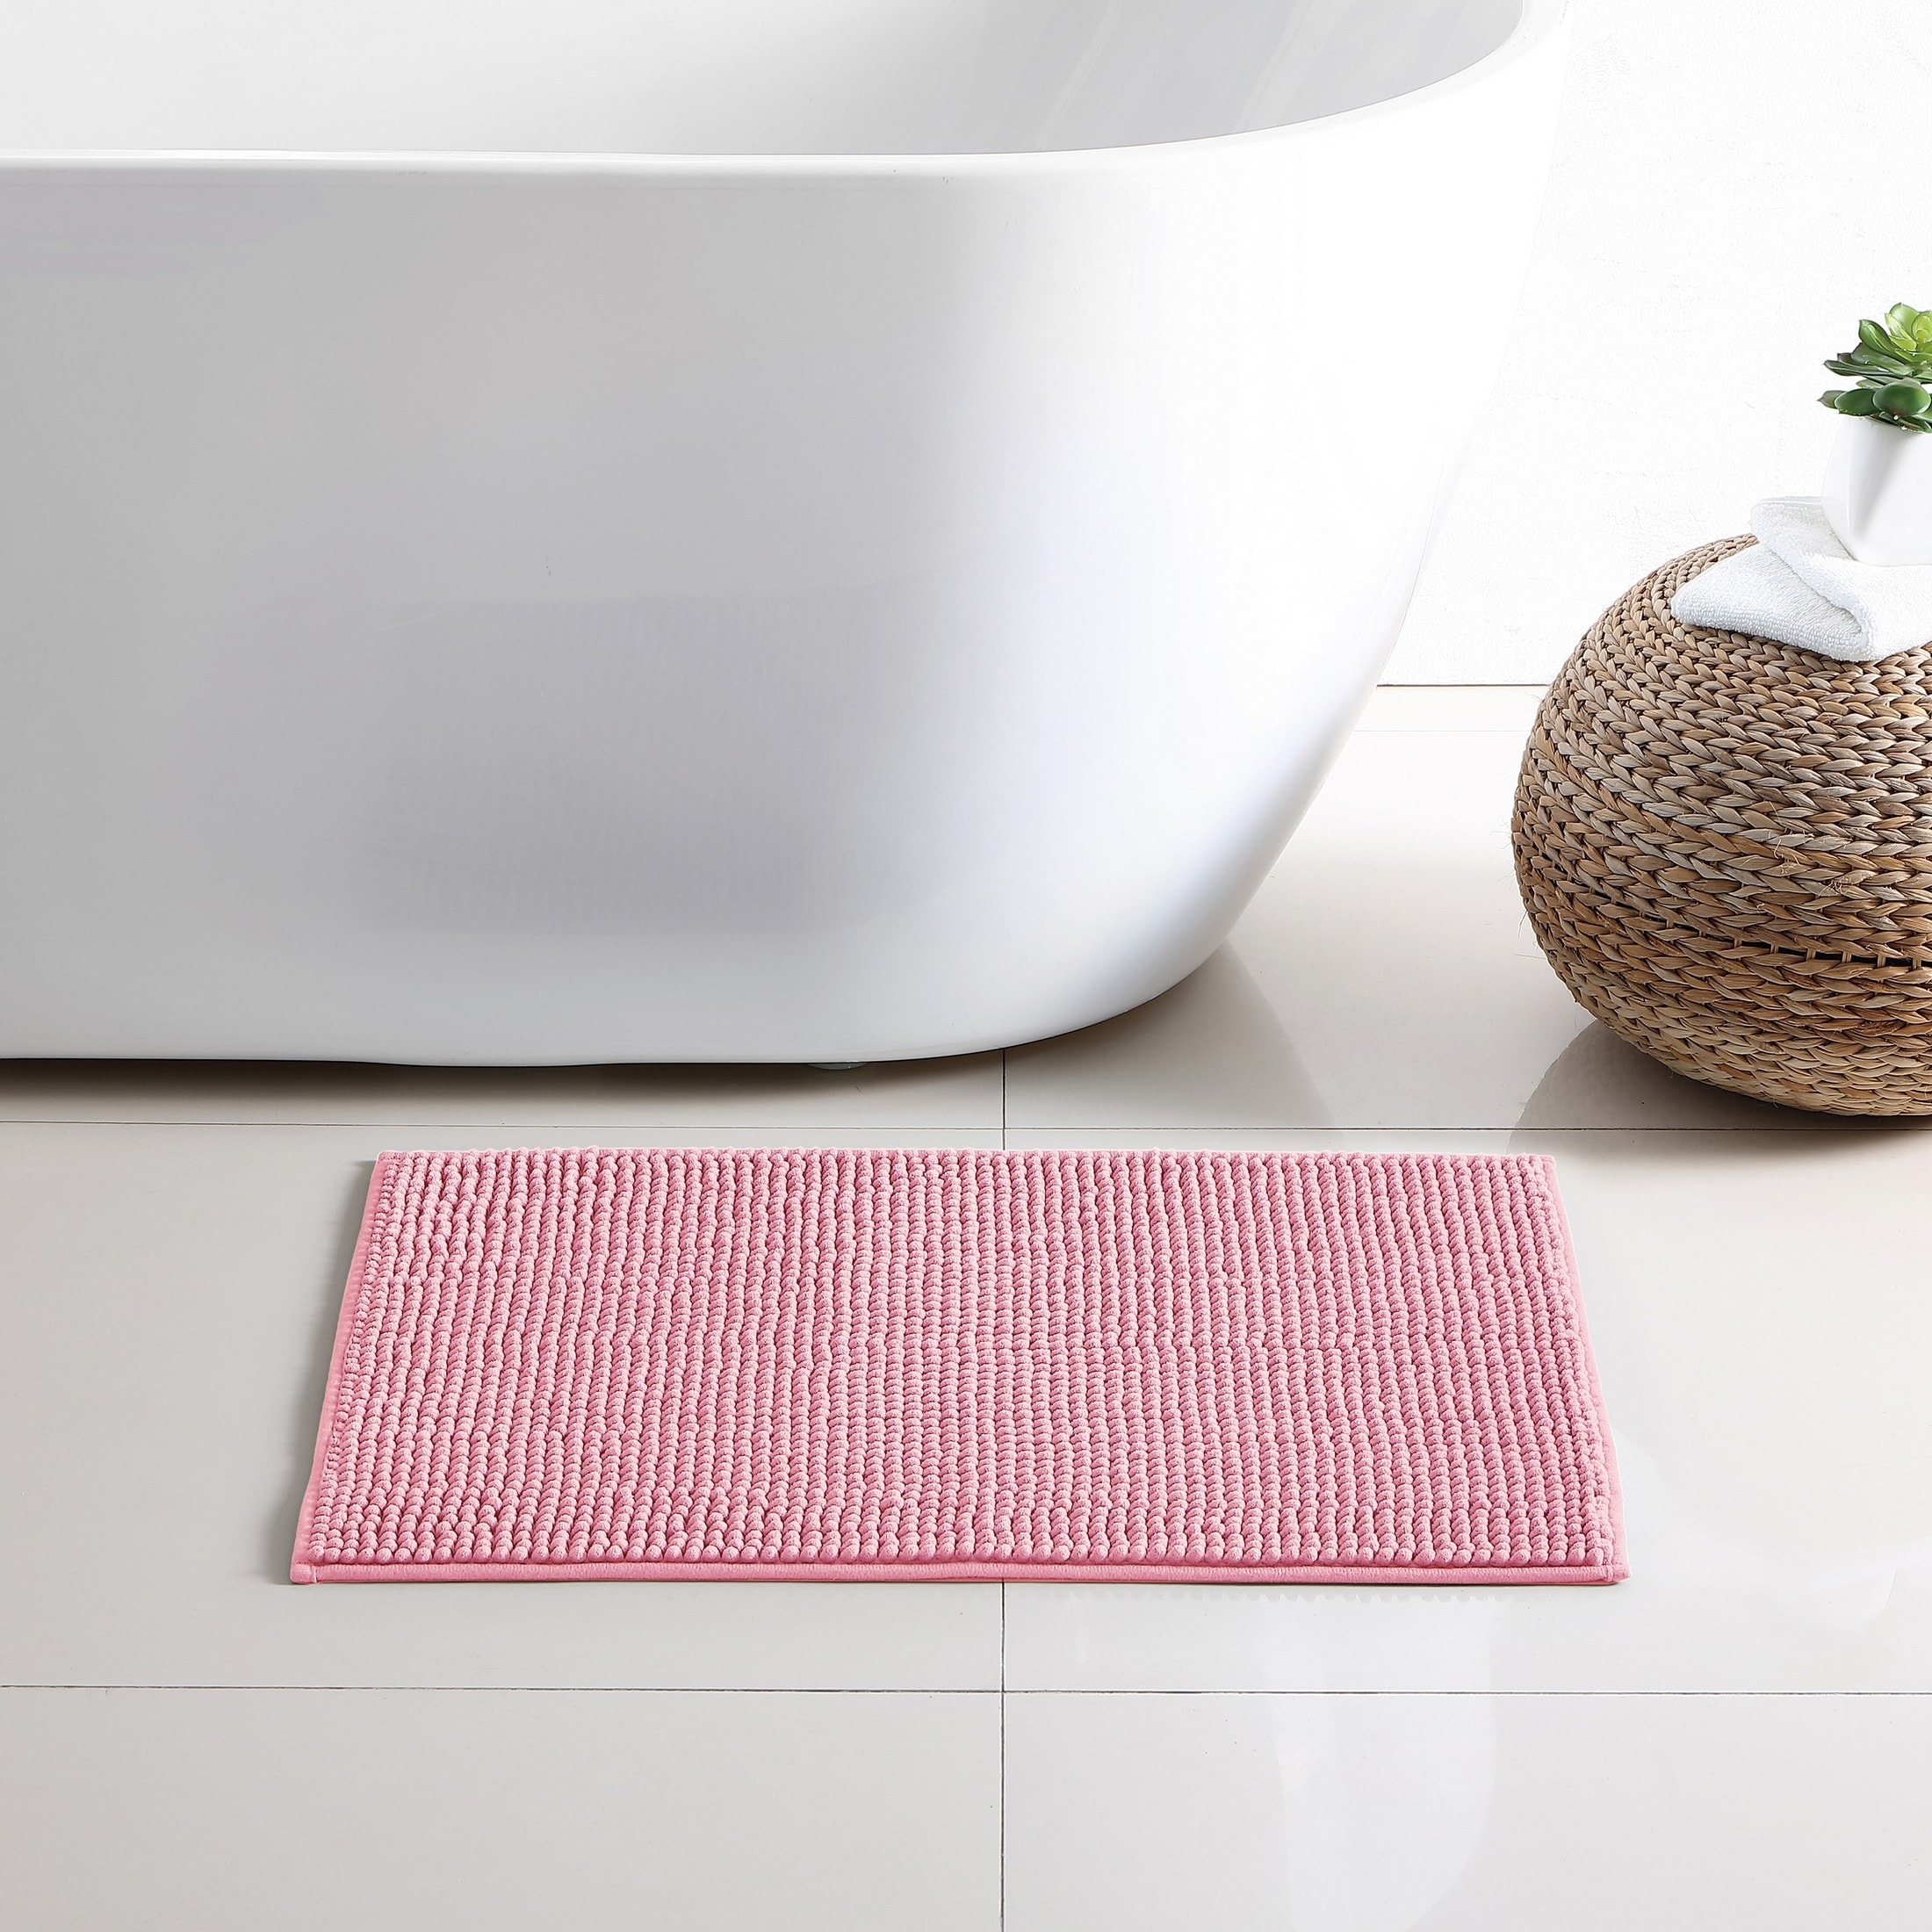 https://ak1.ostkcdn.com/images/products/is/images/direct/5081cbafa4d266bb2ce3cf378145e84f42dfea02/VCNY-Home-Noodle-Bath-Rug.jpg